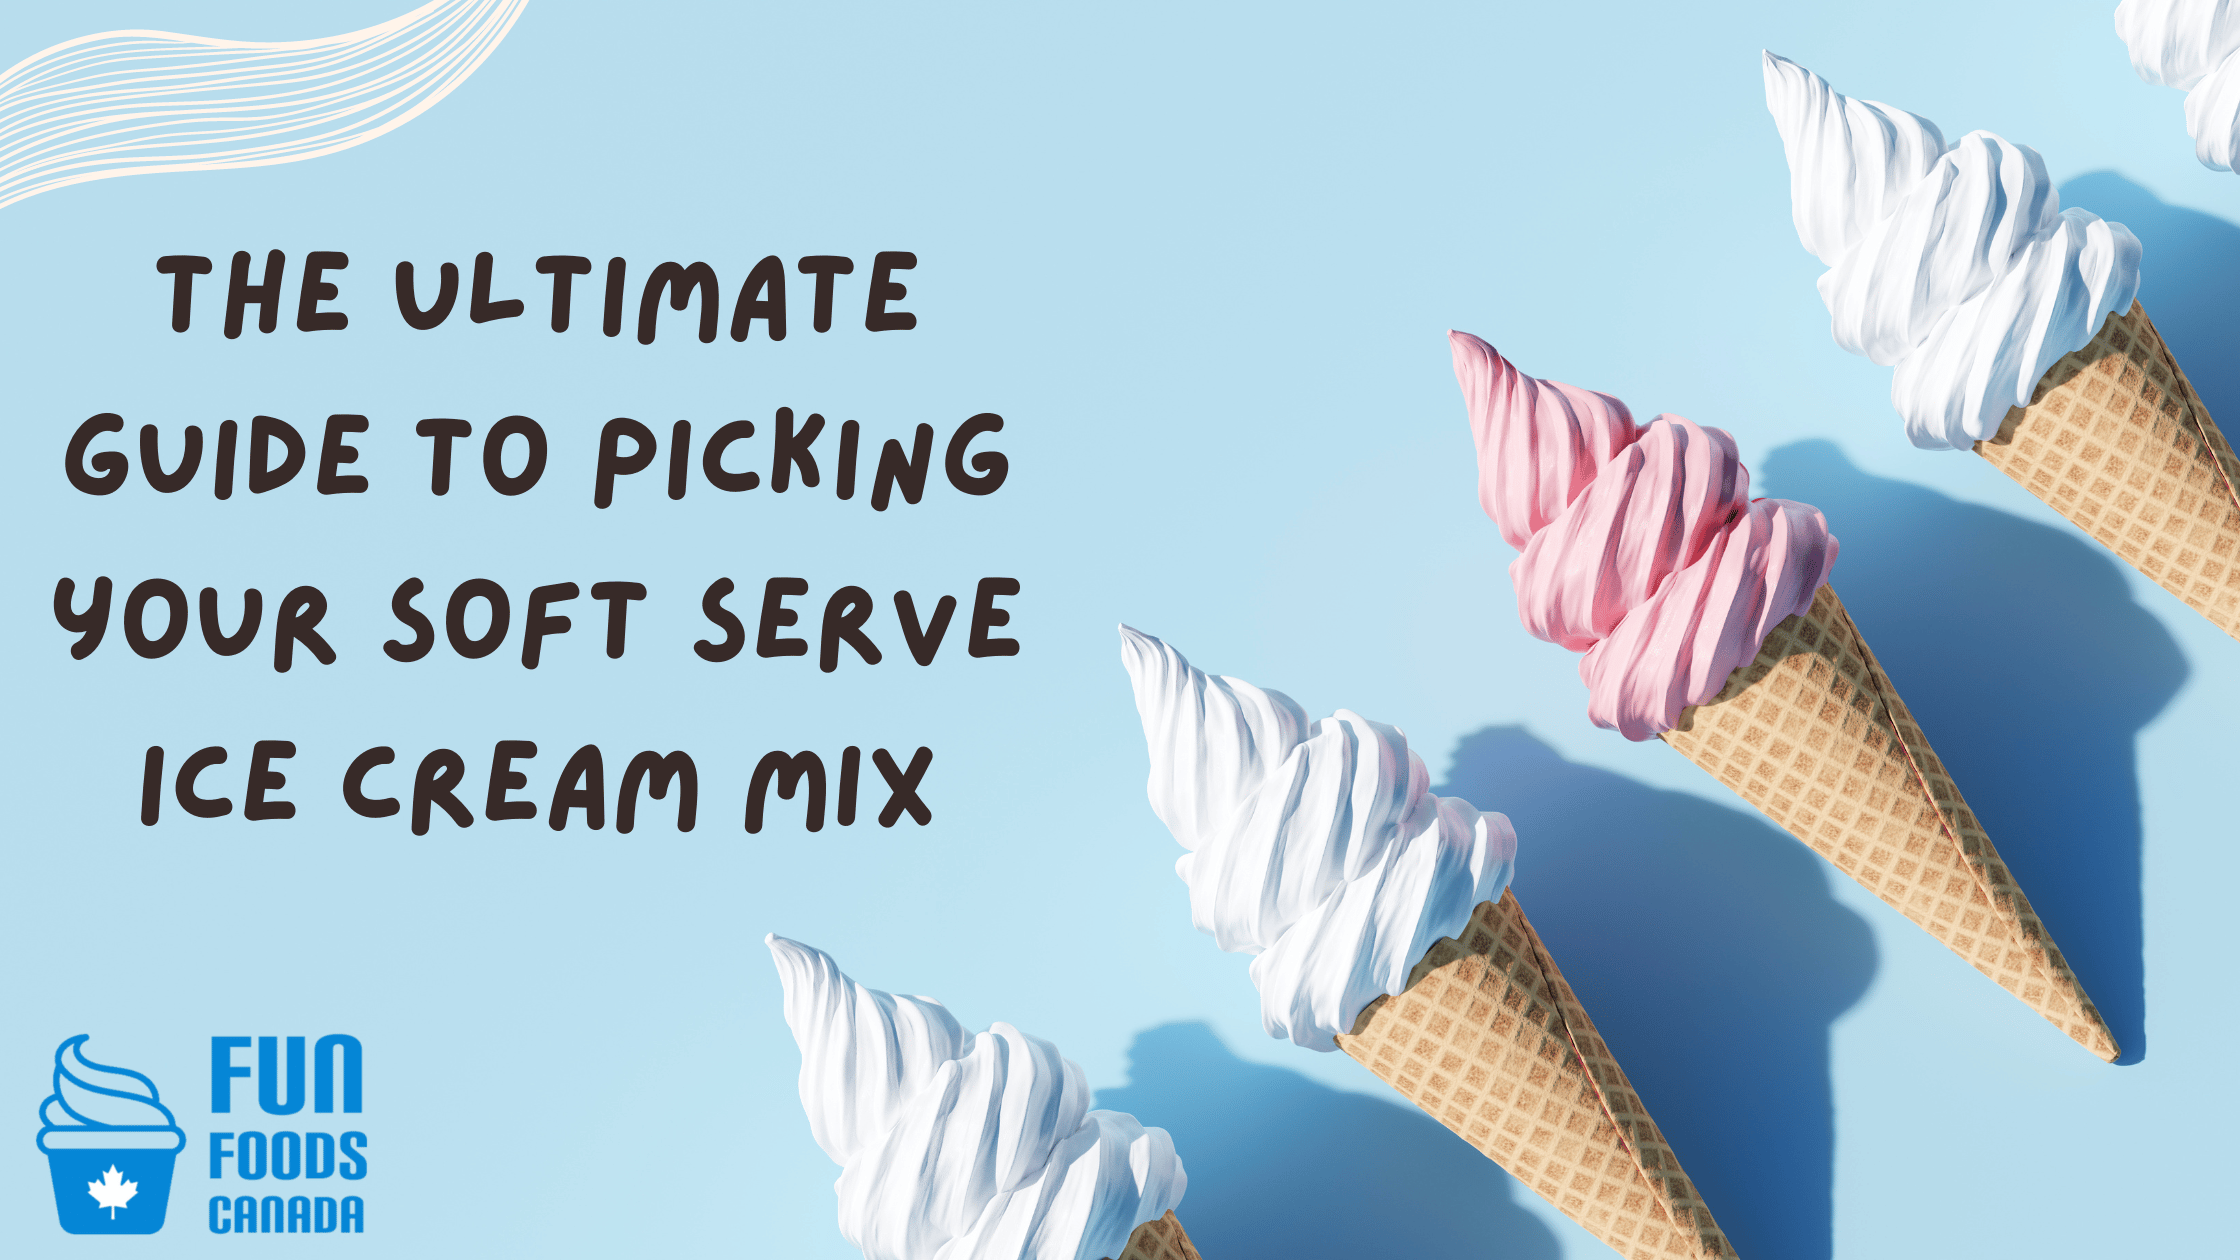 The Ultimate Guide to Picking Soft Serve Ice Cream Mix – Fun Foods Canada